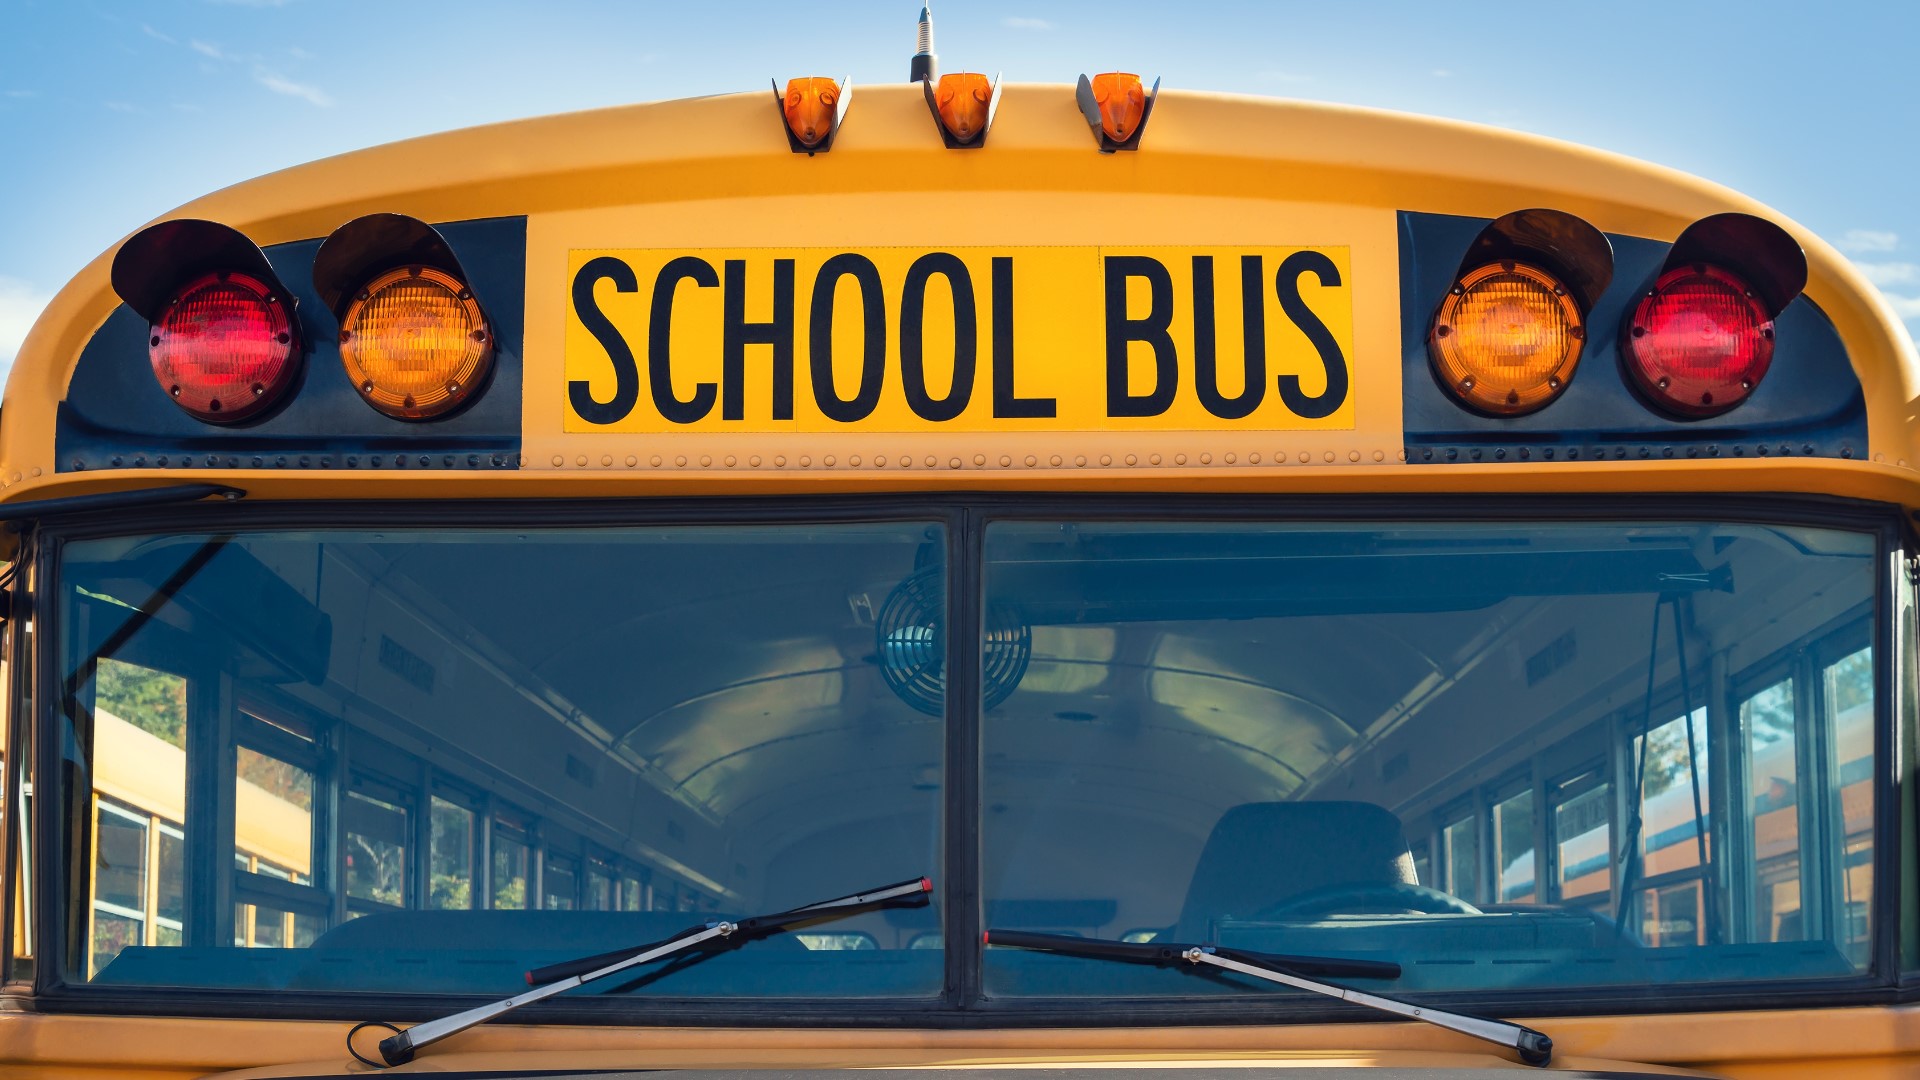 Ammunition was discovered on a Suffolk school bus during a random search on Thursday morning, according to a letter sent to parents.